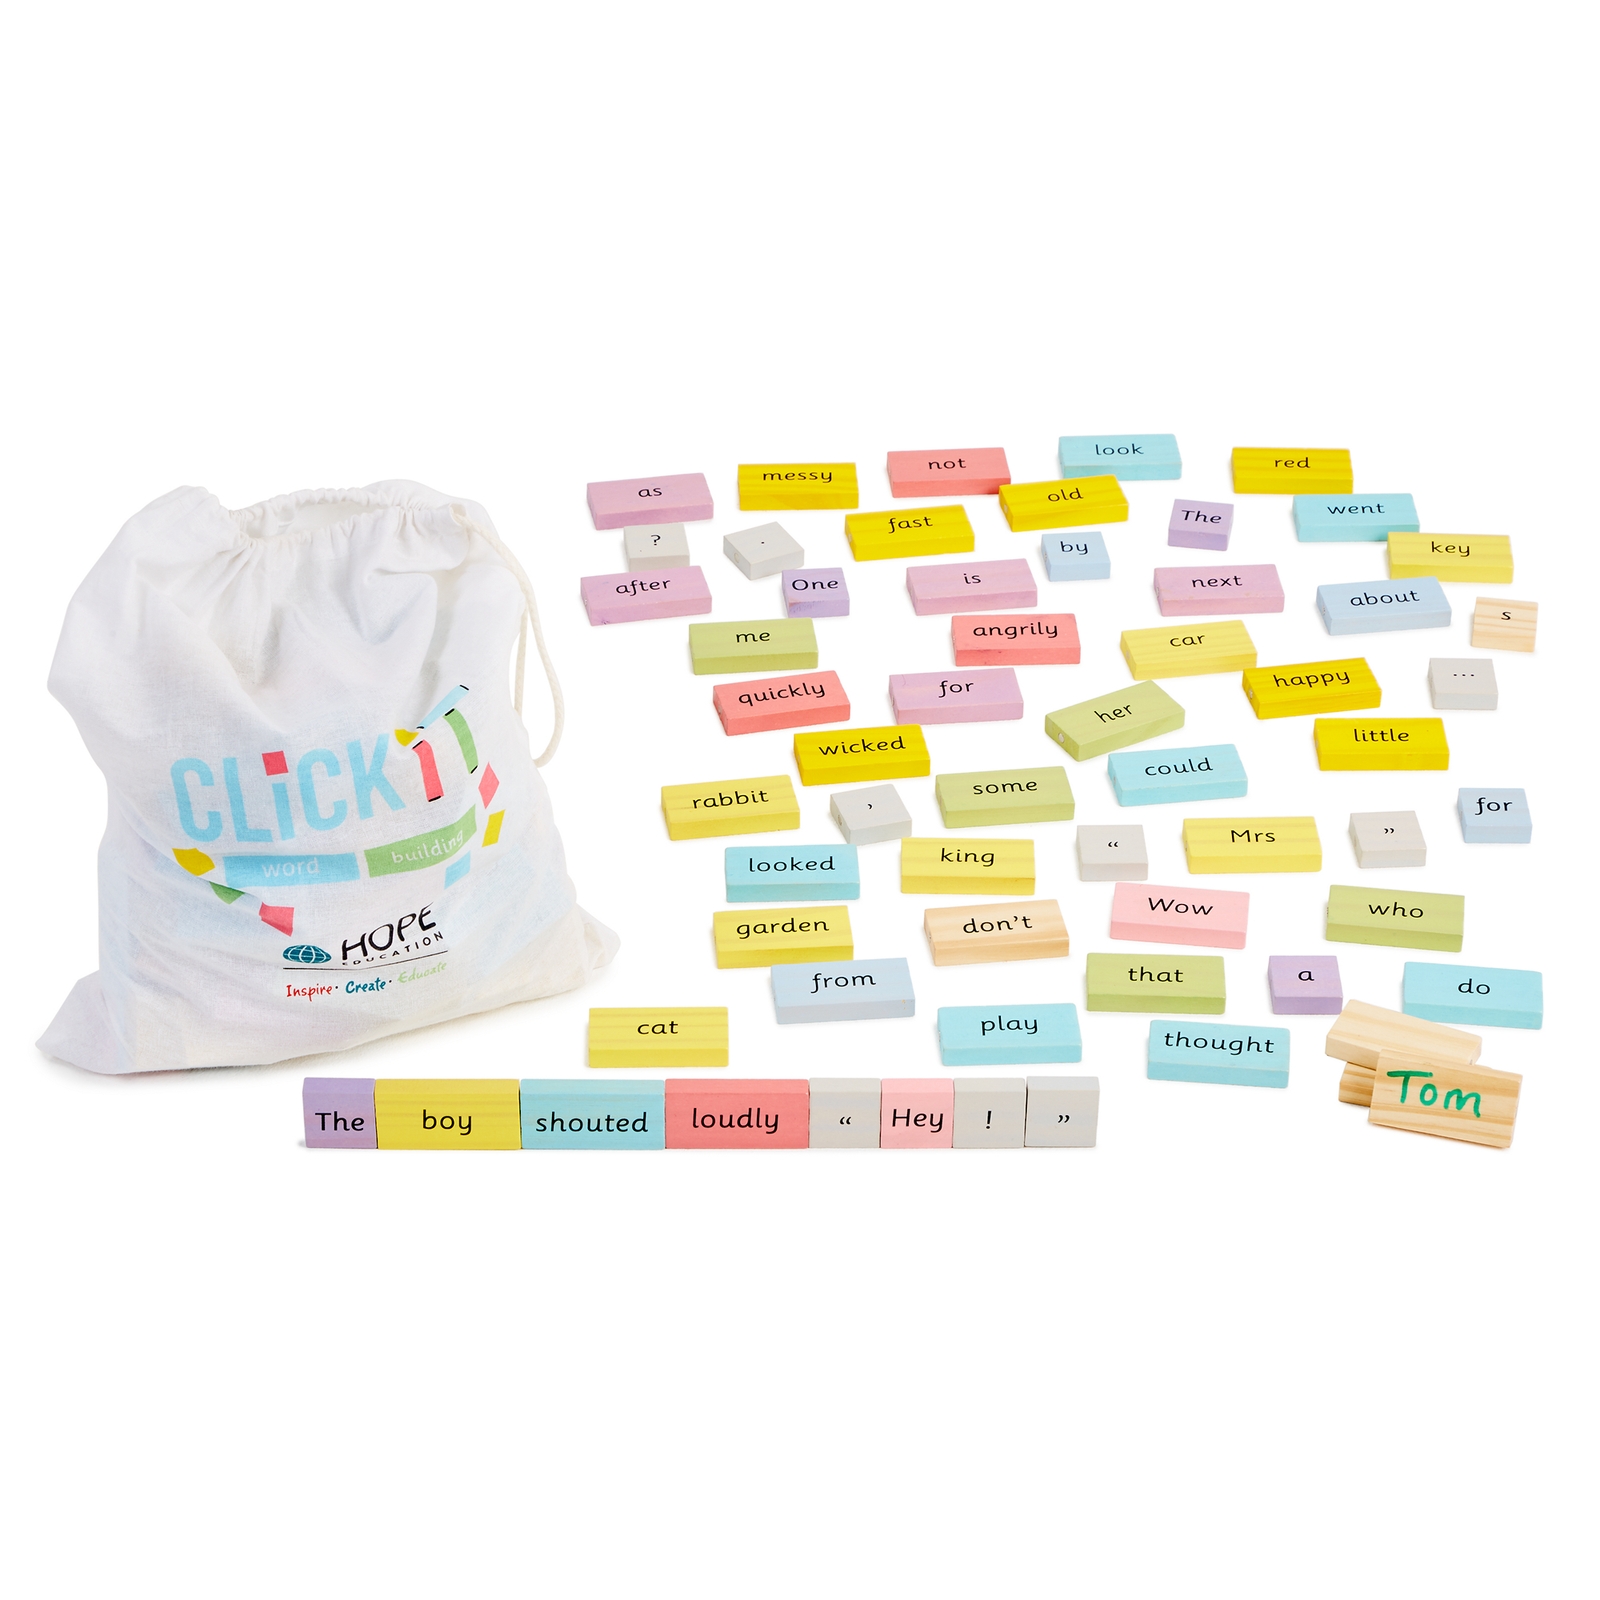 Click It Sentence Building Sack from Hope Education